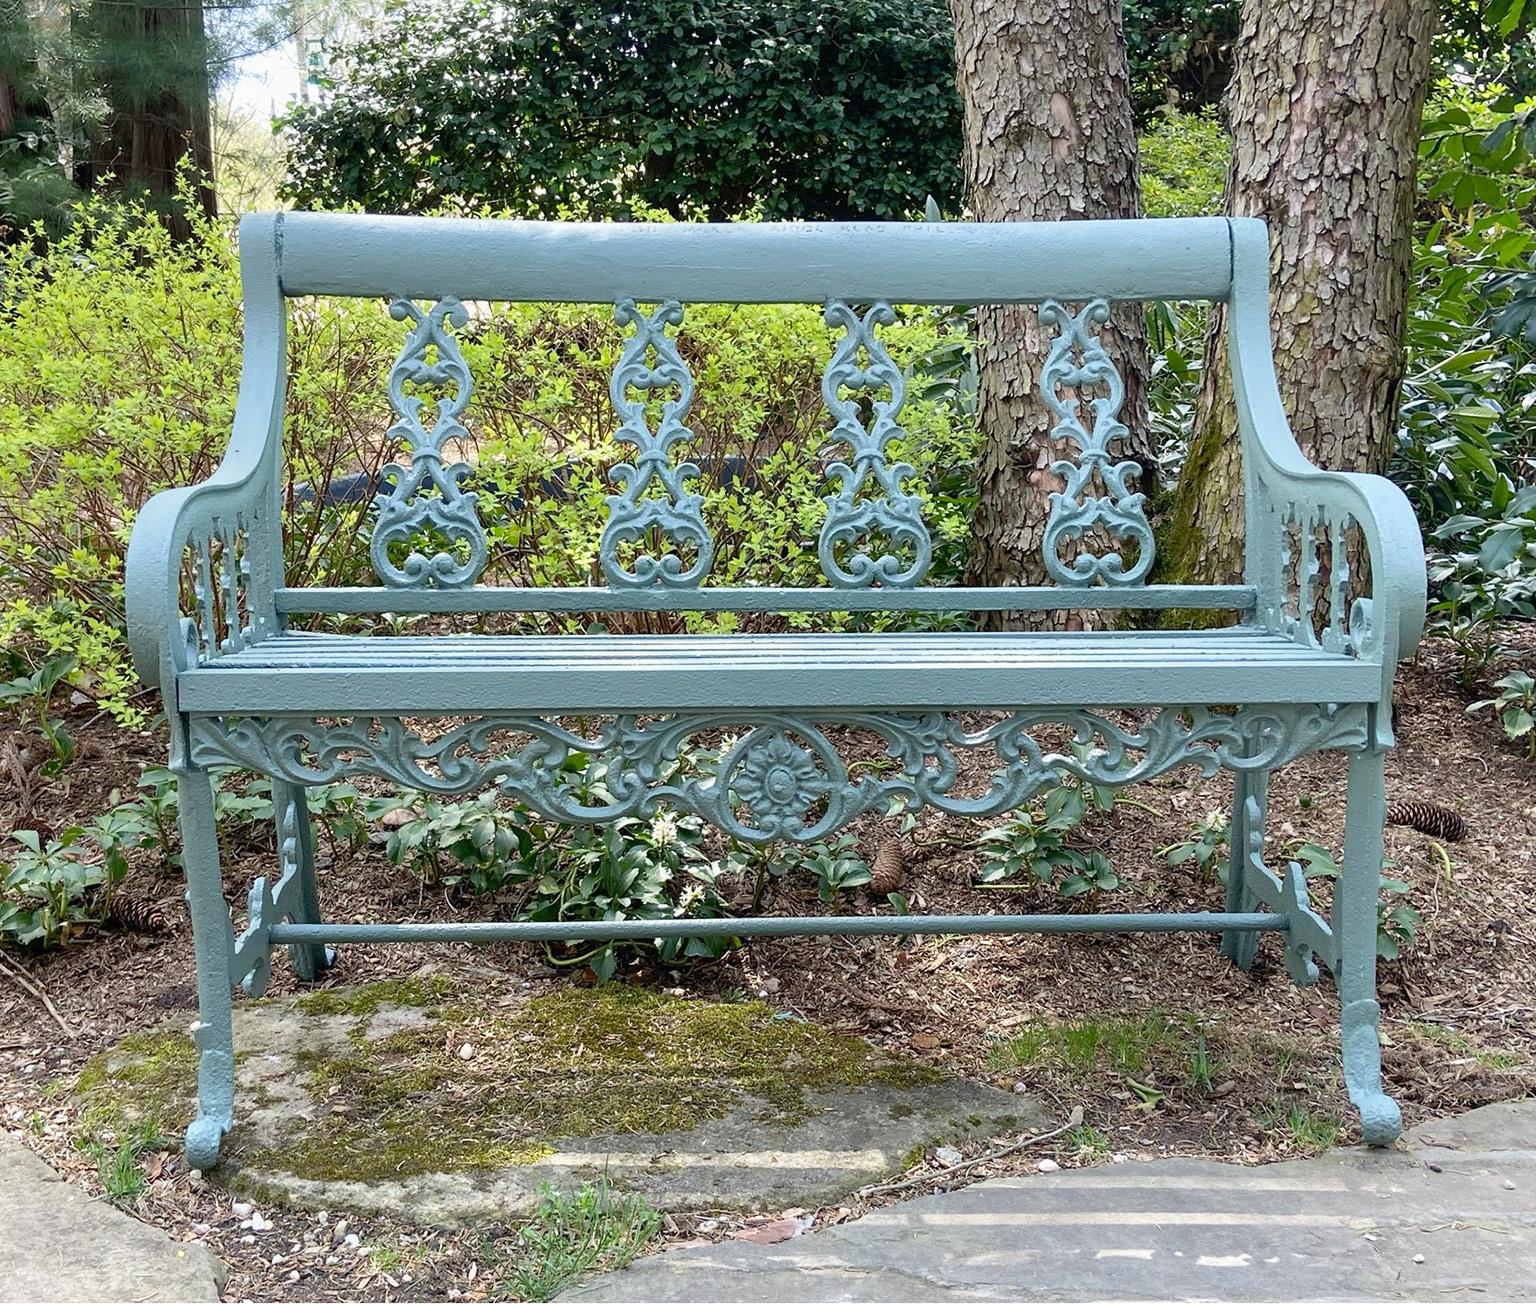 An early, rare cast-iron settee by Robert Wood of Philadelphia, marked “....Maker Ridge Road Phila”, the back with four leafy scrollwork splats, the crest rail of simple straight form, the gently sloped arms supported by scrolled complimentary